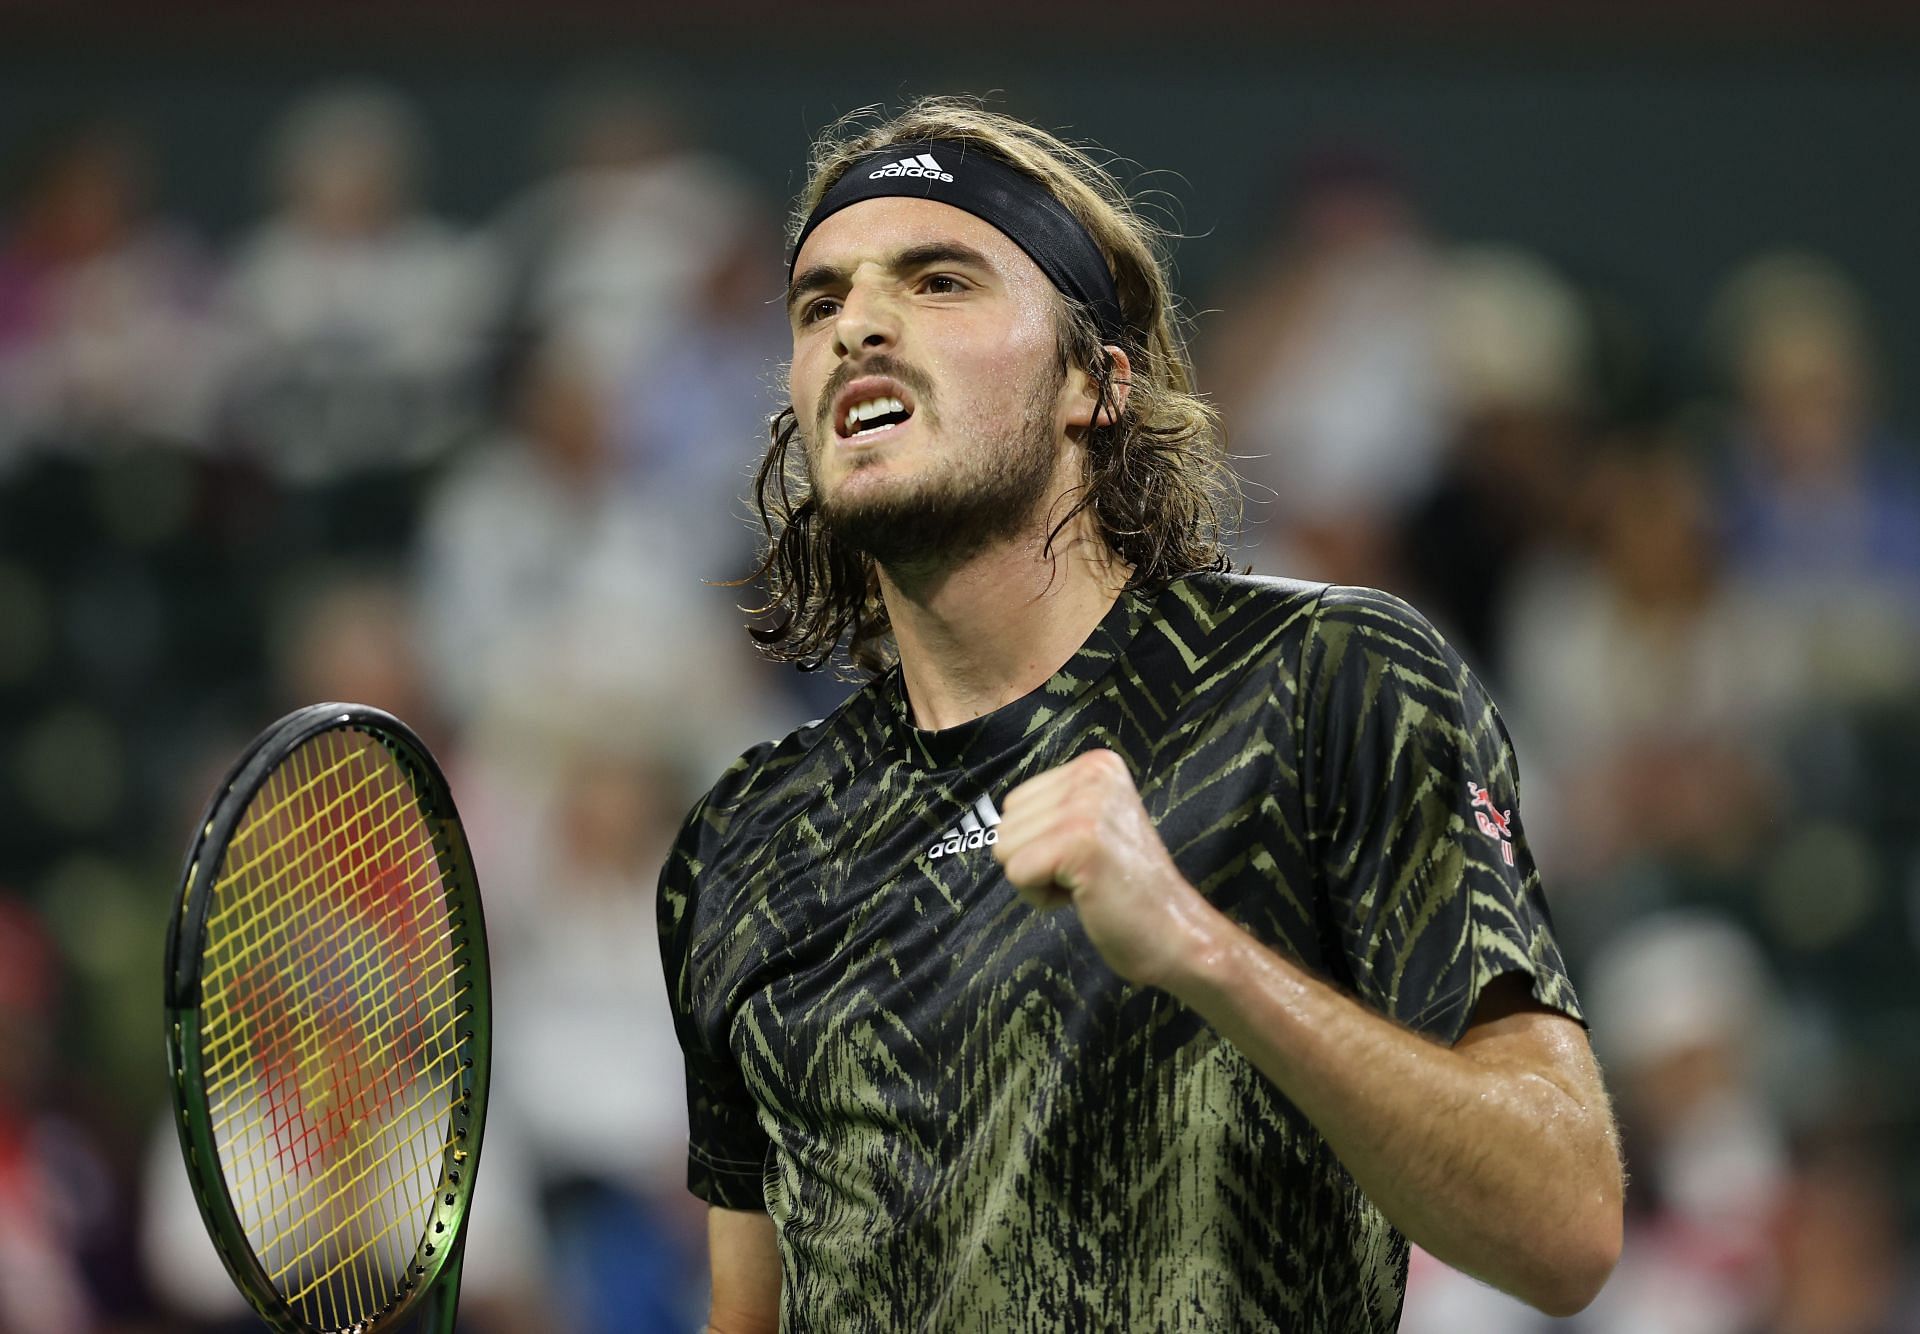 Stefanos Tsitsipas reached the quarterfinals at the 2021 Indian Wells Masters